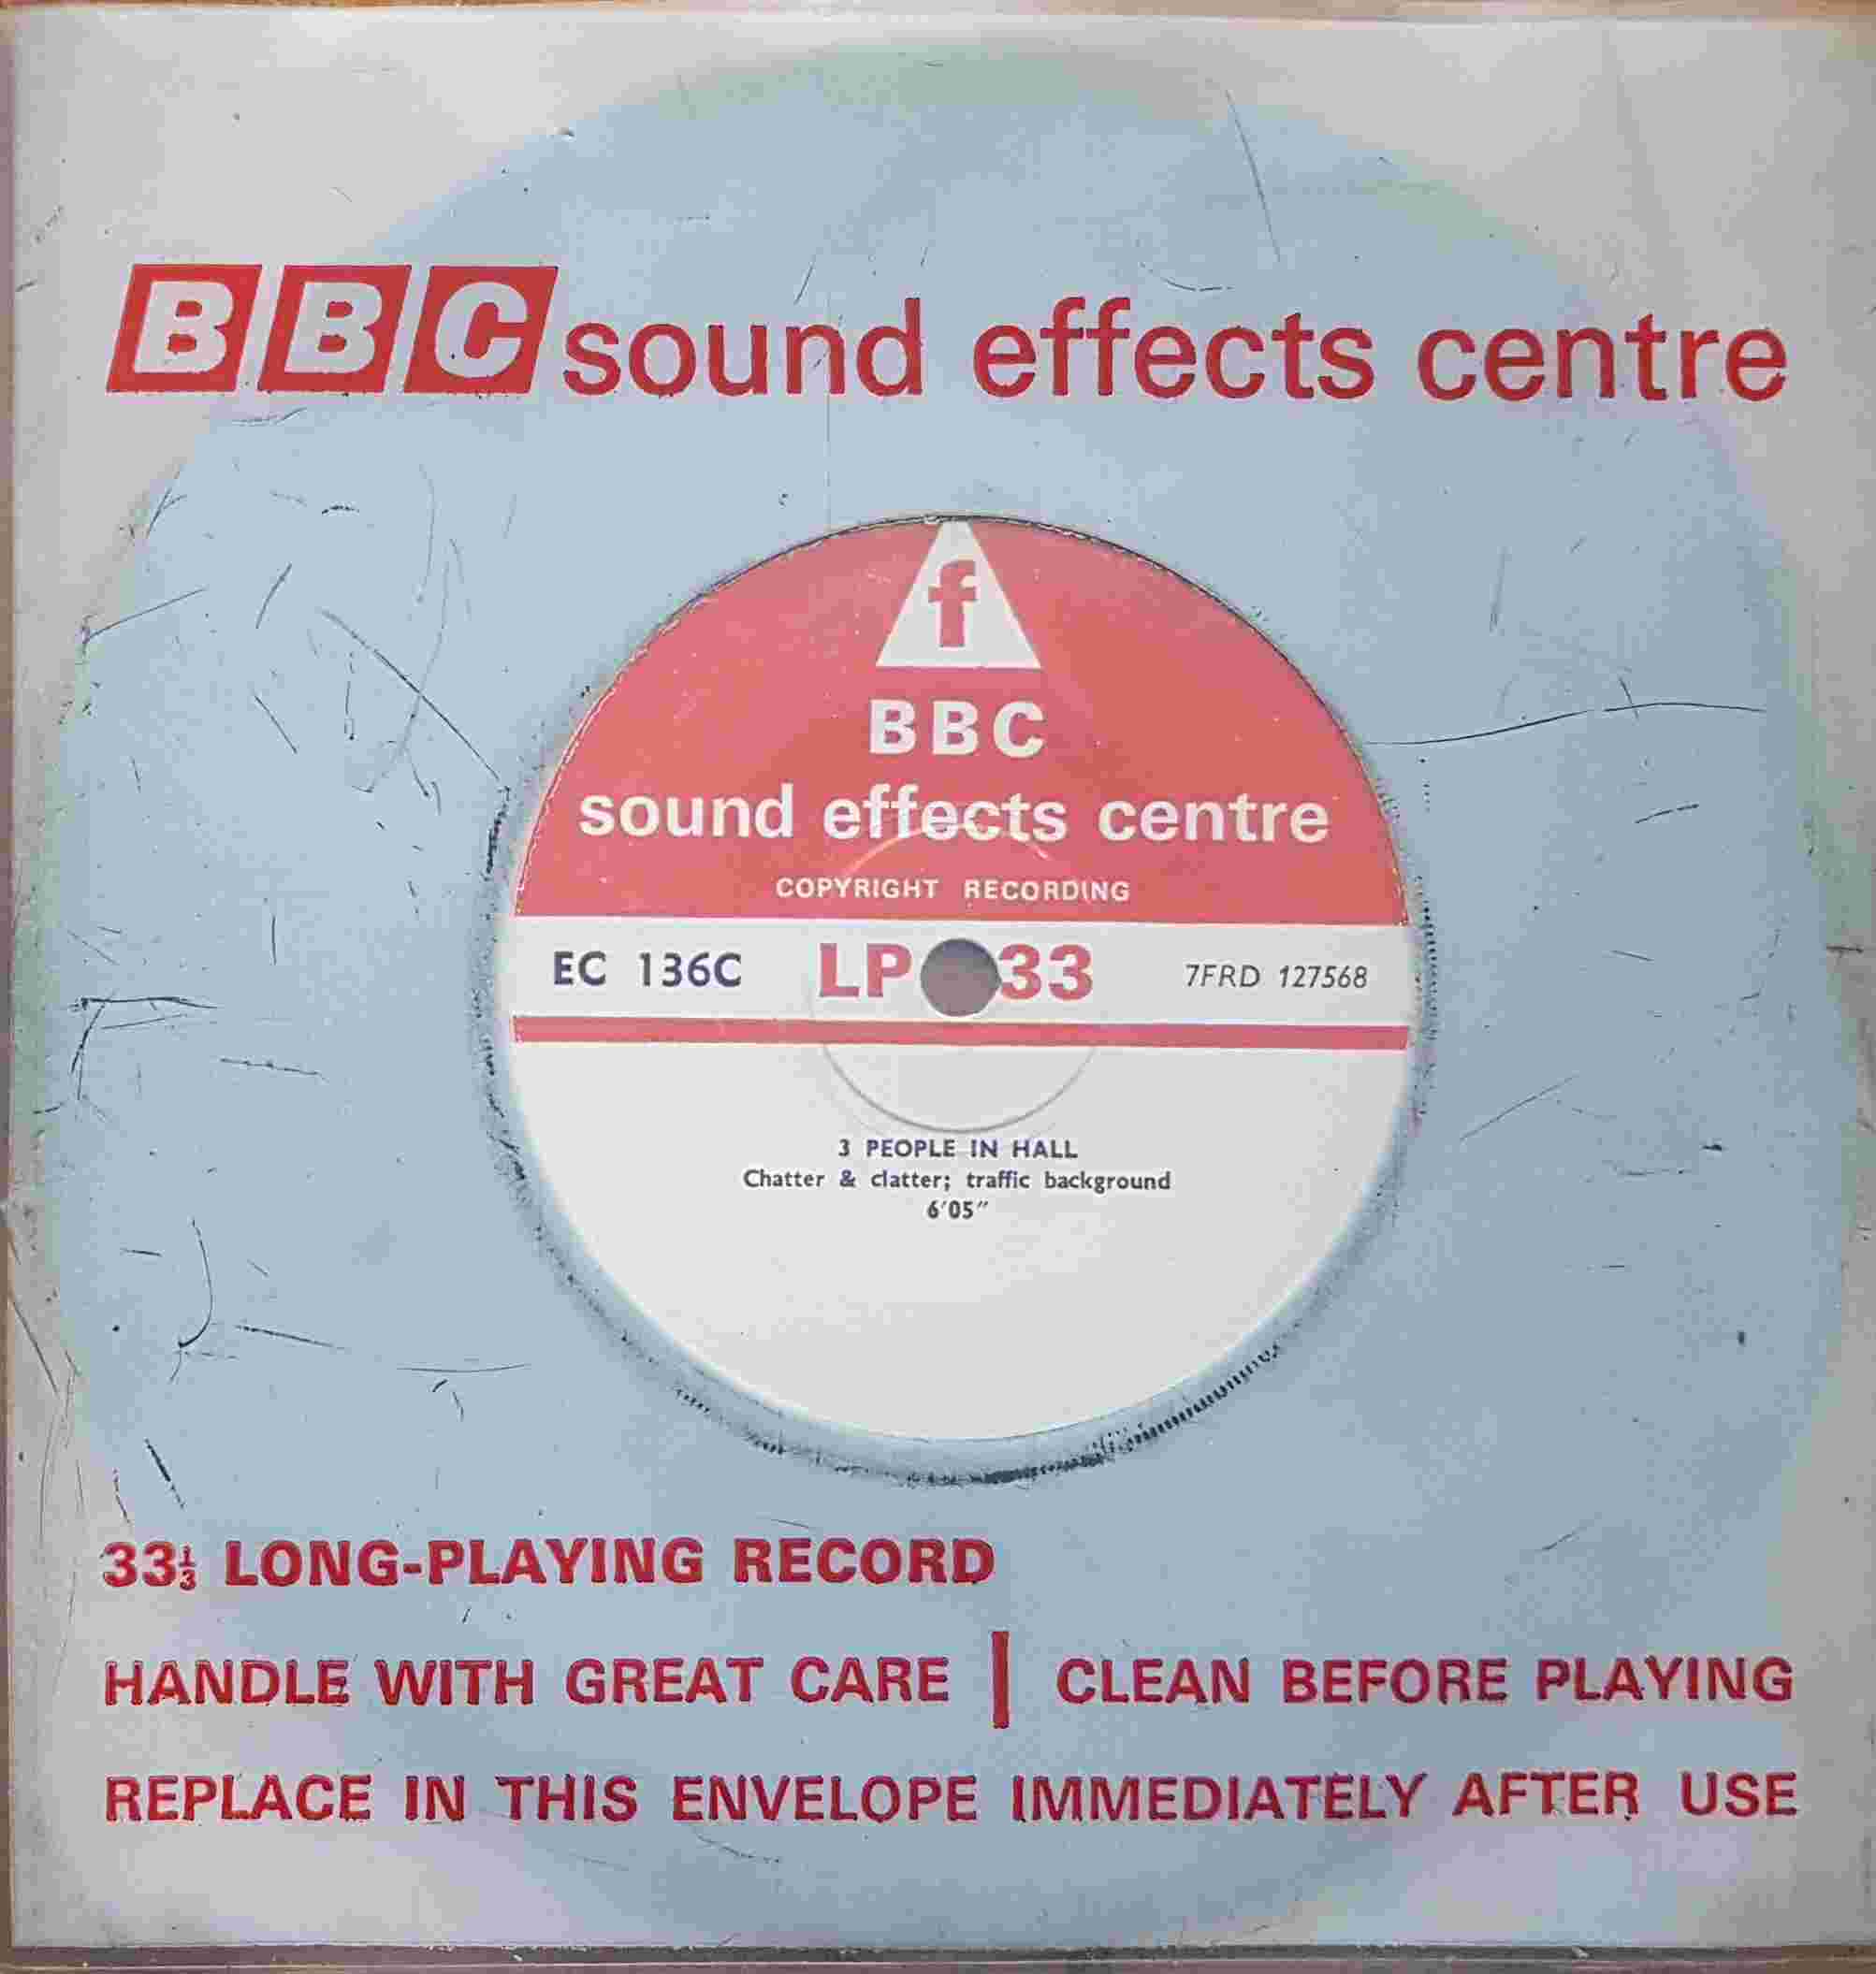 Picture of EC 136C 3 people in hall / 700 people in large hall by artist Not registered from the BBC records and Tapes library